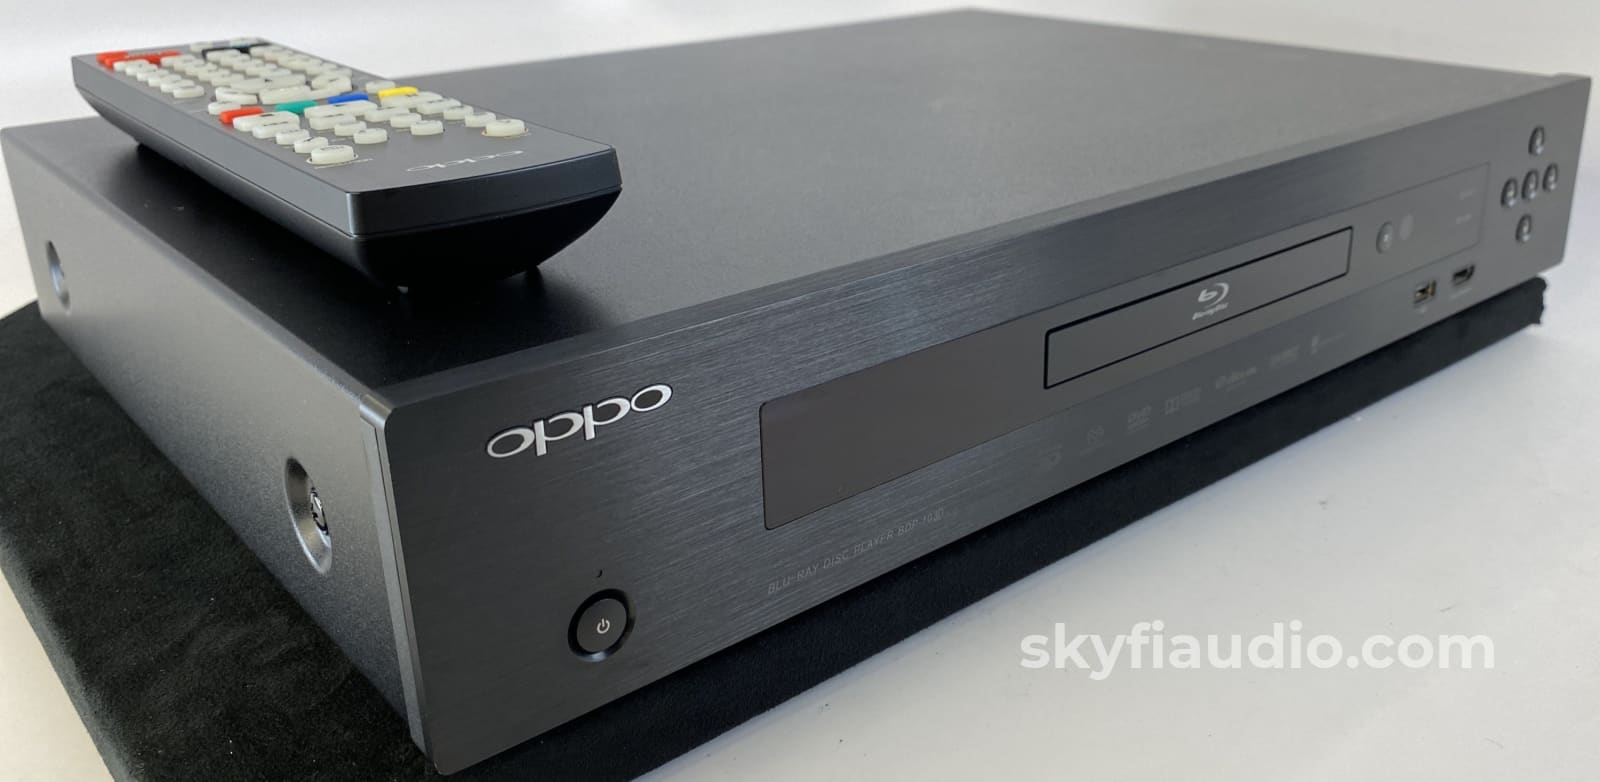 Oppo Bdp-103D Darbee Edition Sacd/Cd/Blu-Ray Player With Remote Cd + Digital